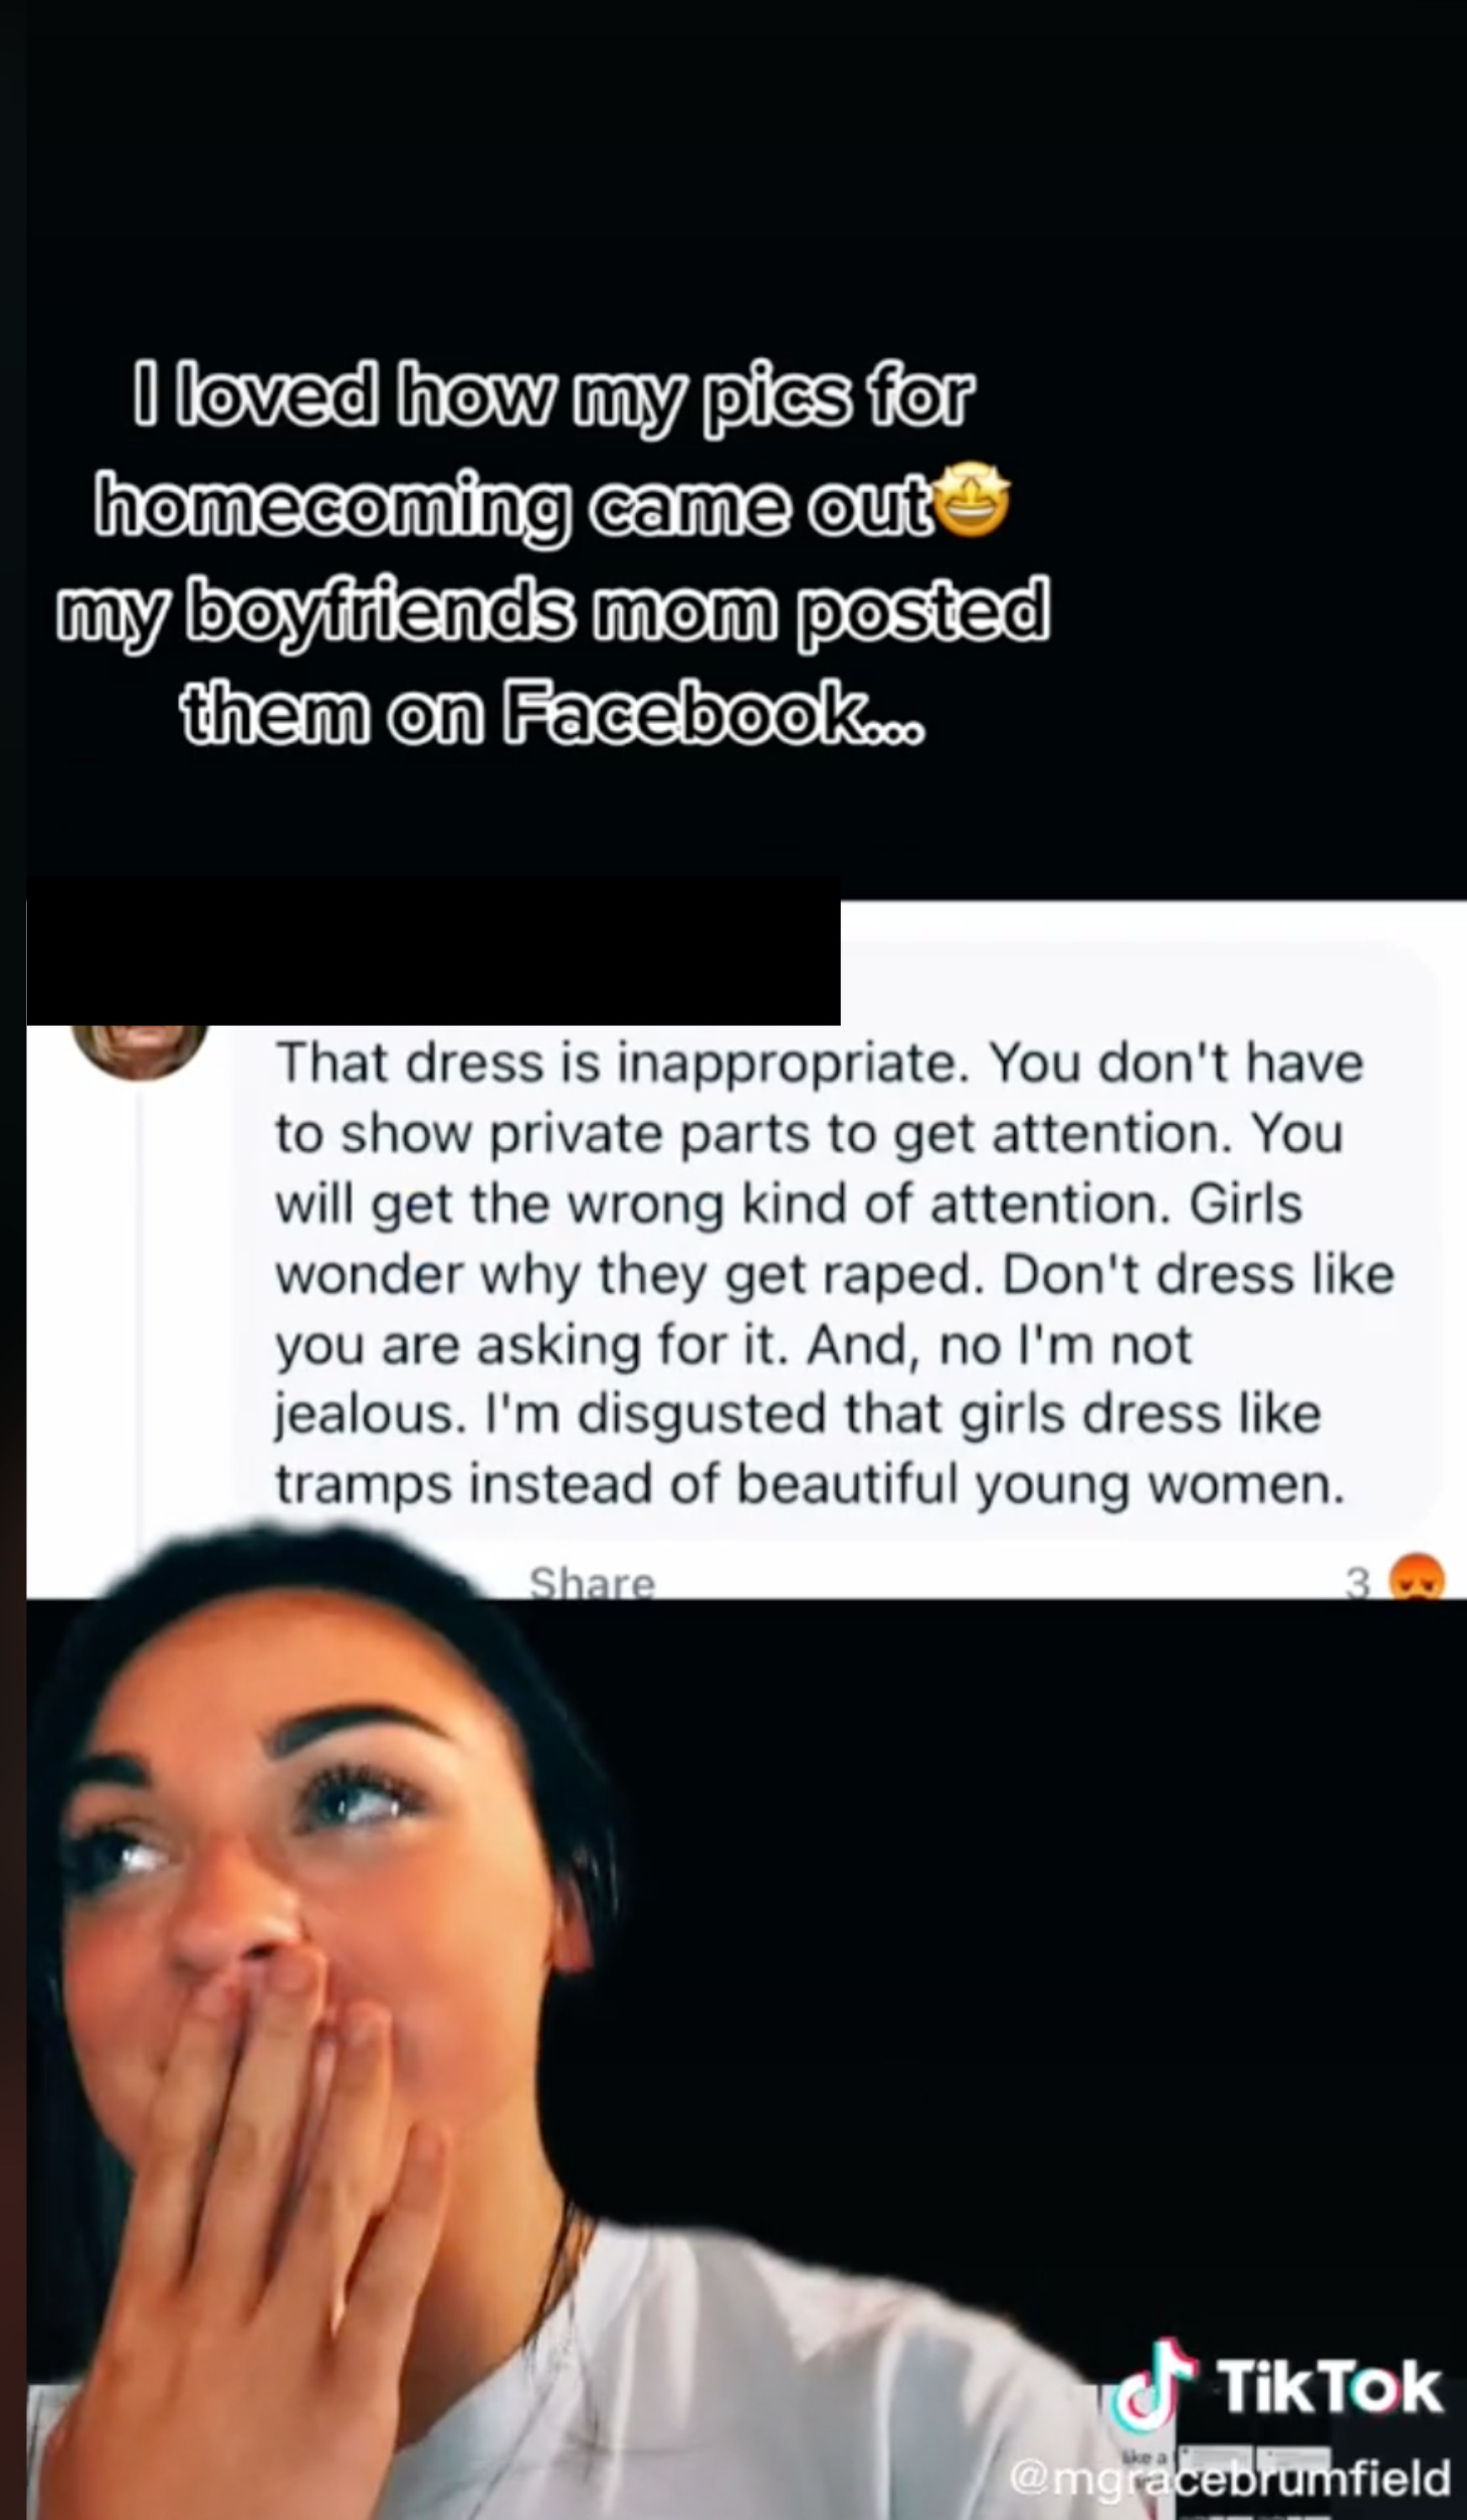 Grace covering her mouth with her hand below the comment &quot;That dress is inappropriate. ... Girls wonder why they get raped. ... I&#x27;m disgusted that girls dress like tramps instead of beautiful young women&quot;